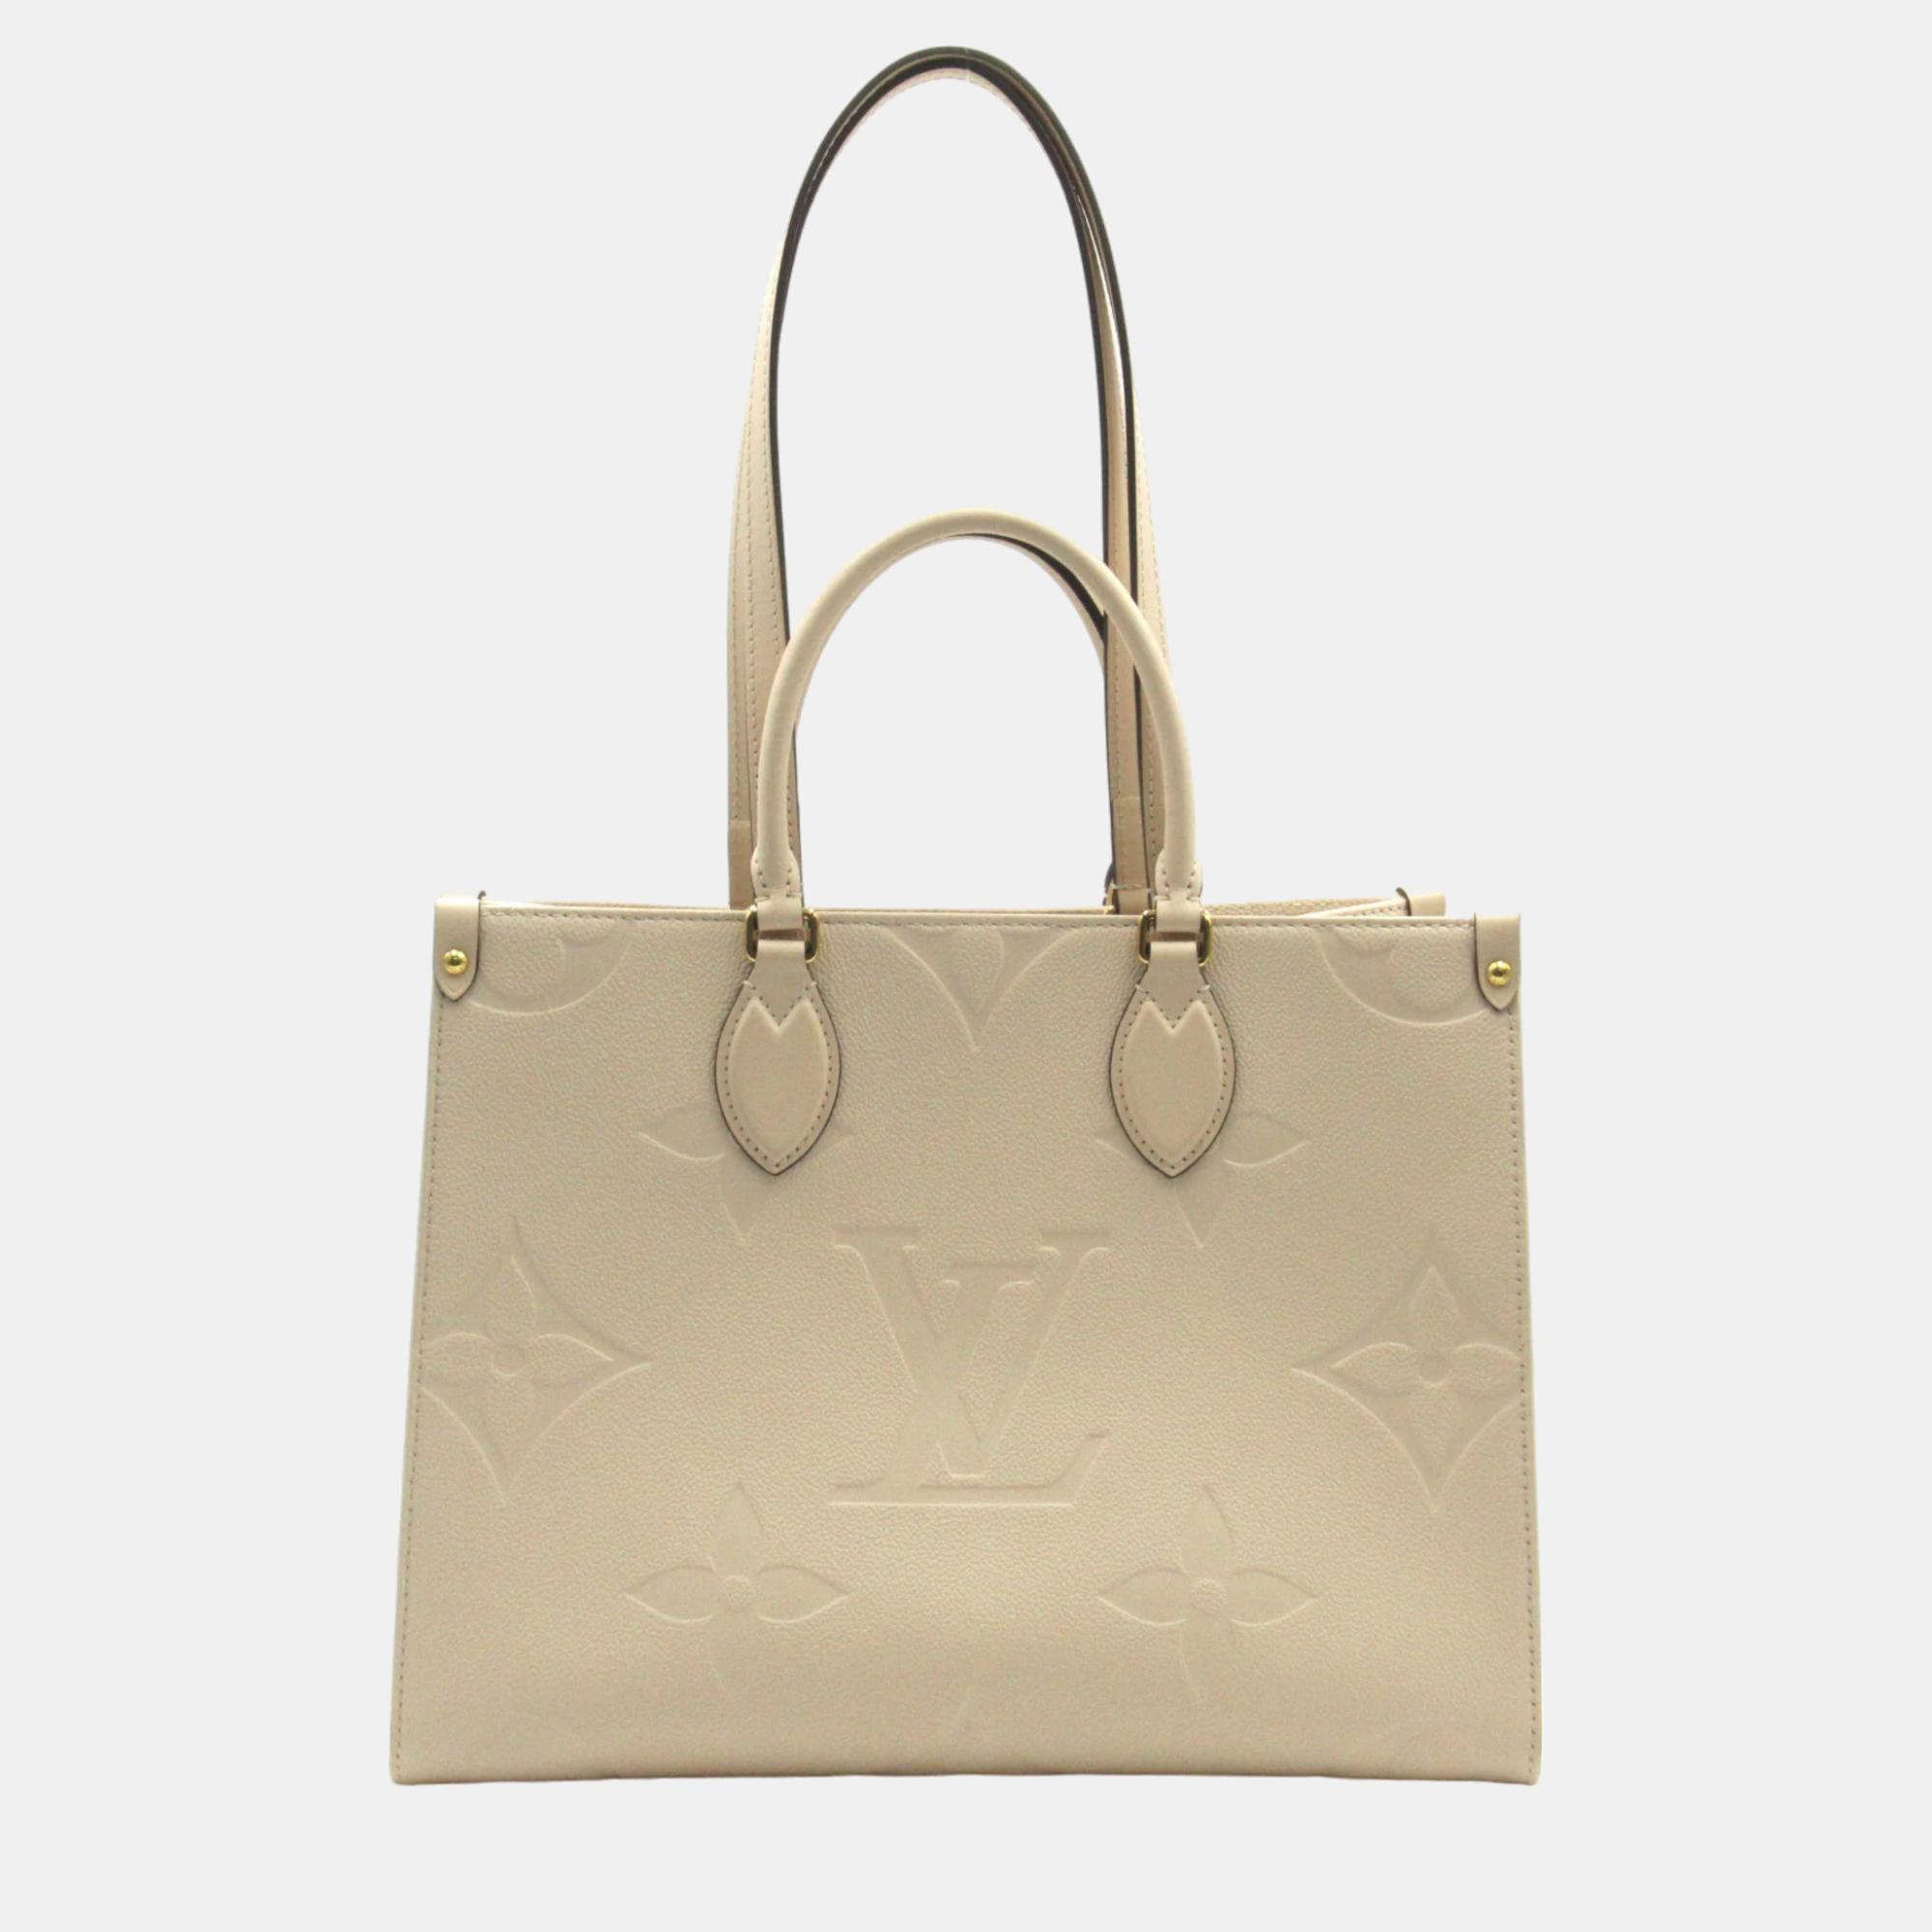 Louis vuitton beige leather small onthego totes